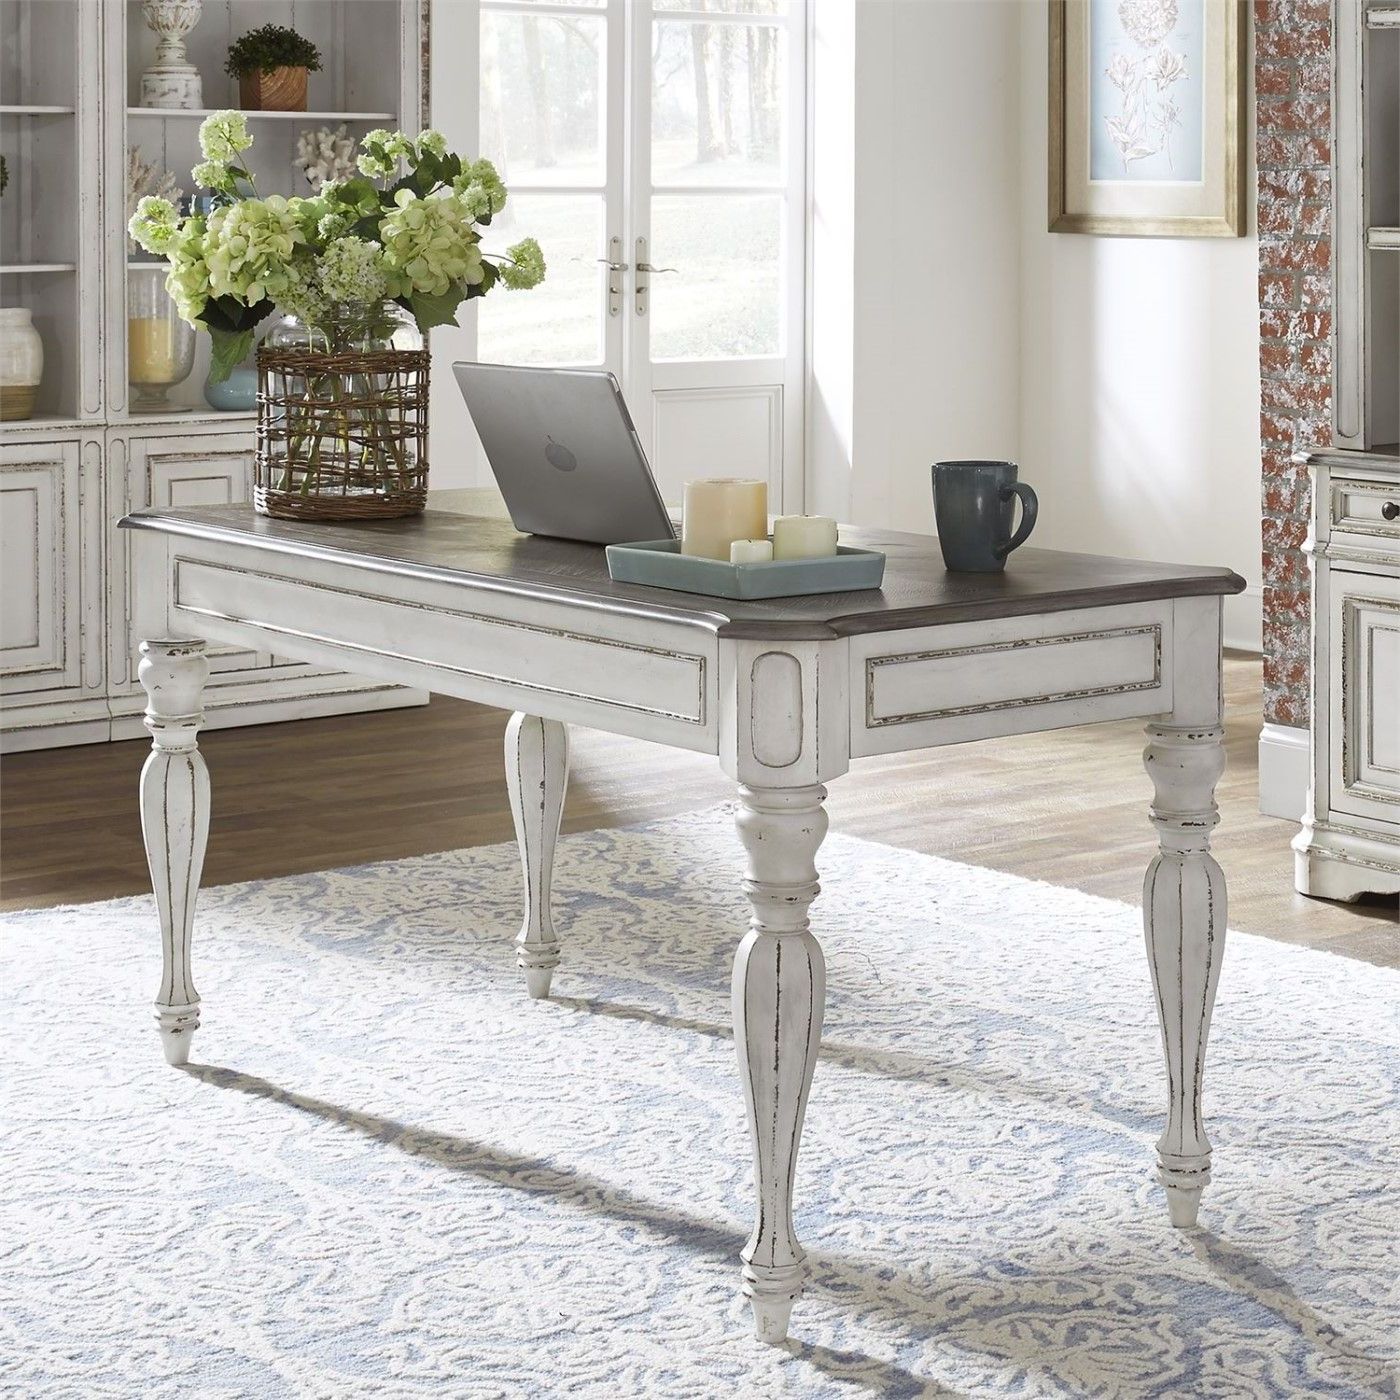 Most Up To Date White And Cement Writing Desks Within Magnolia Traditional Antique White Writing Desk With Flip Down Keyboard (View 11 of 15)